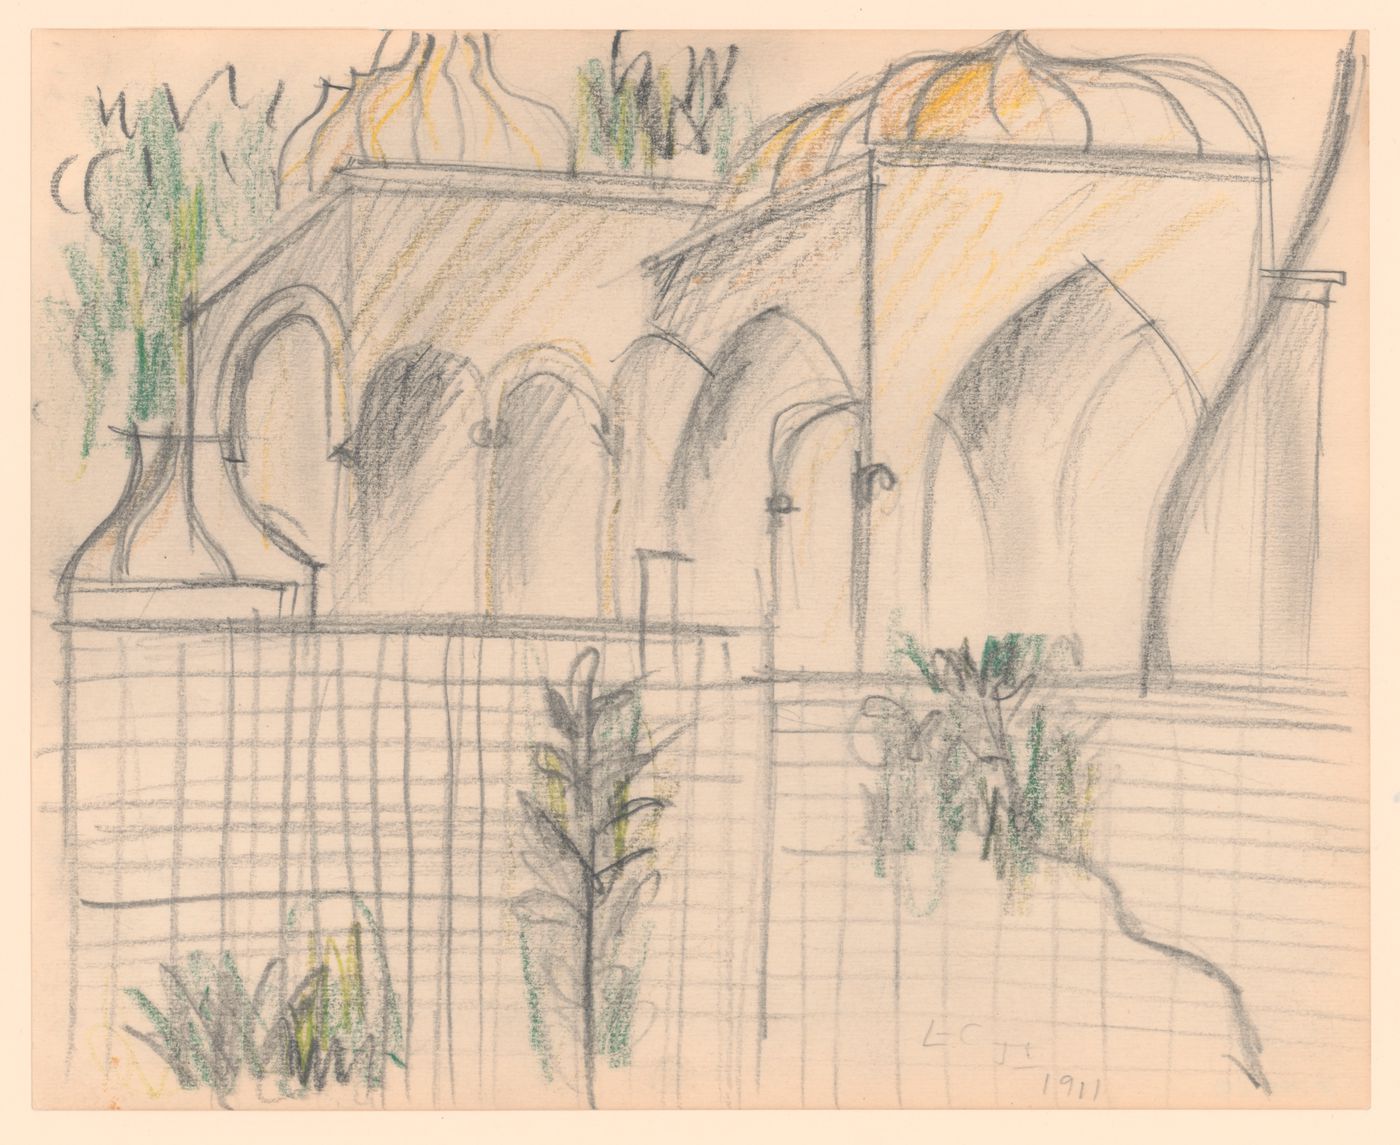 Copy after Le Corbusier, perspective sketch of a domed courtyard, tomb pavilions surrounded by lattice screen, Atikali Pasa mosque,Istanbul